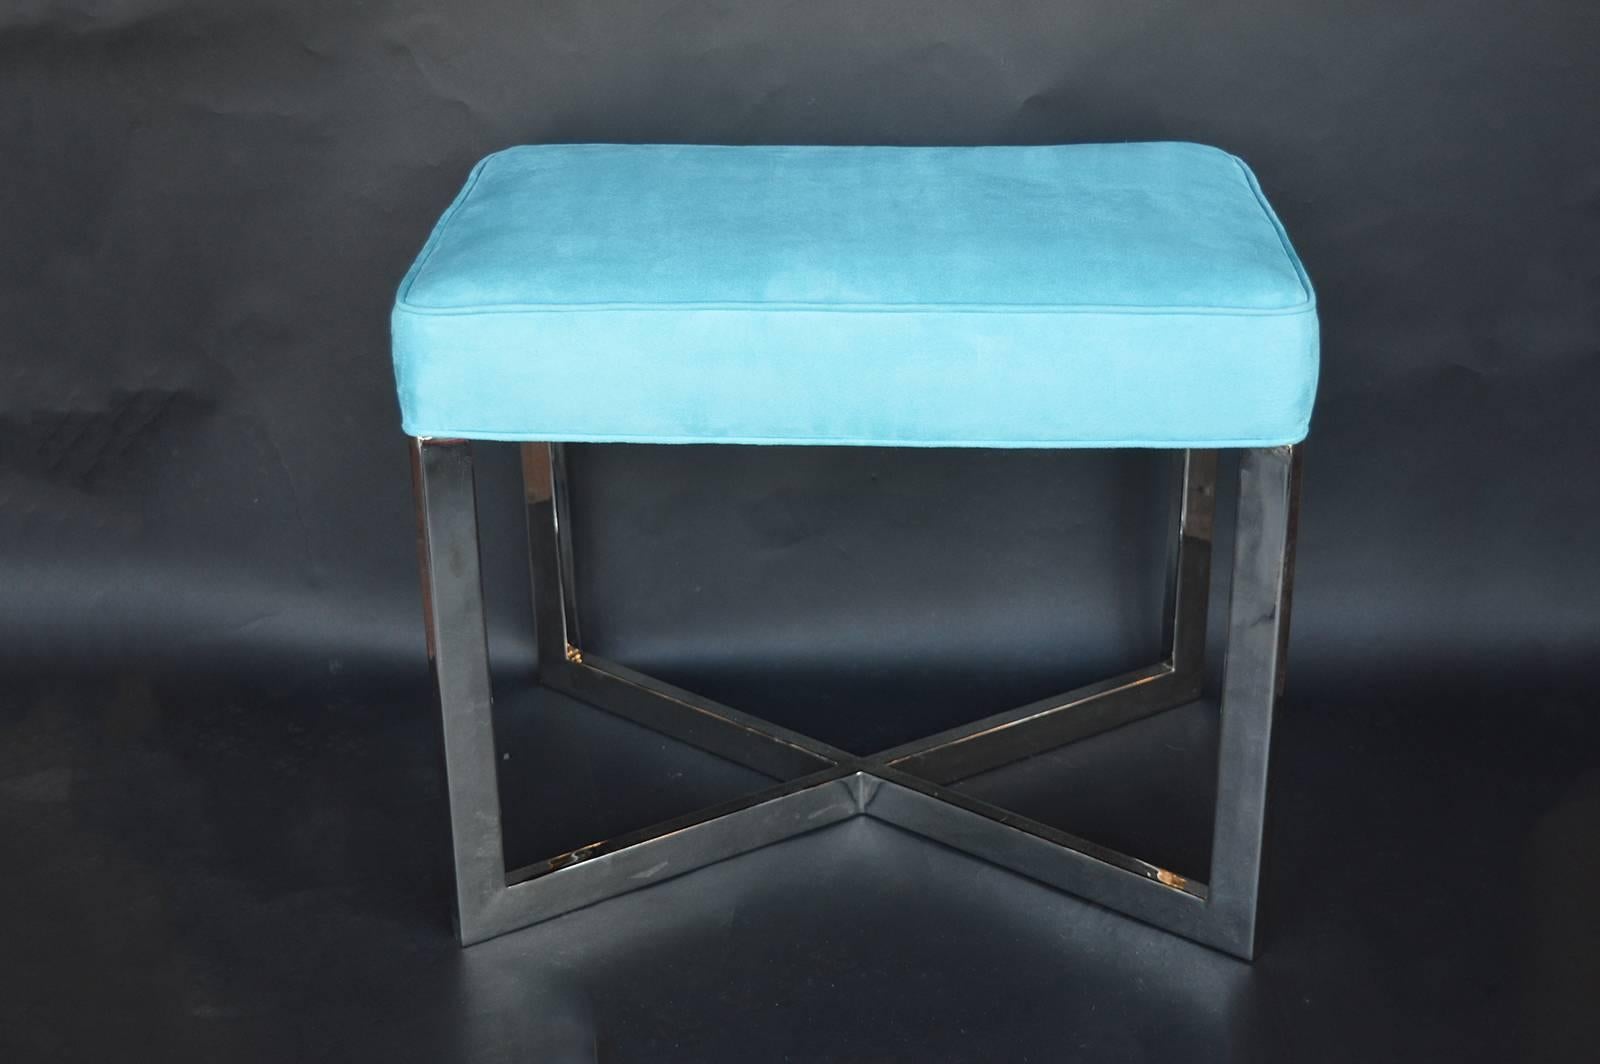 Pair of blue suede and nickel-plated stools.